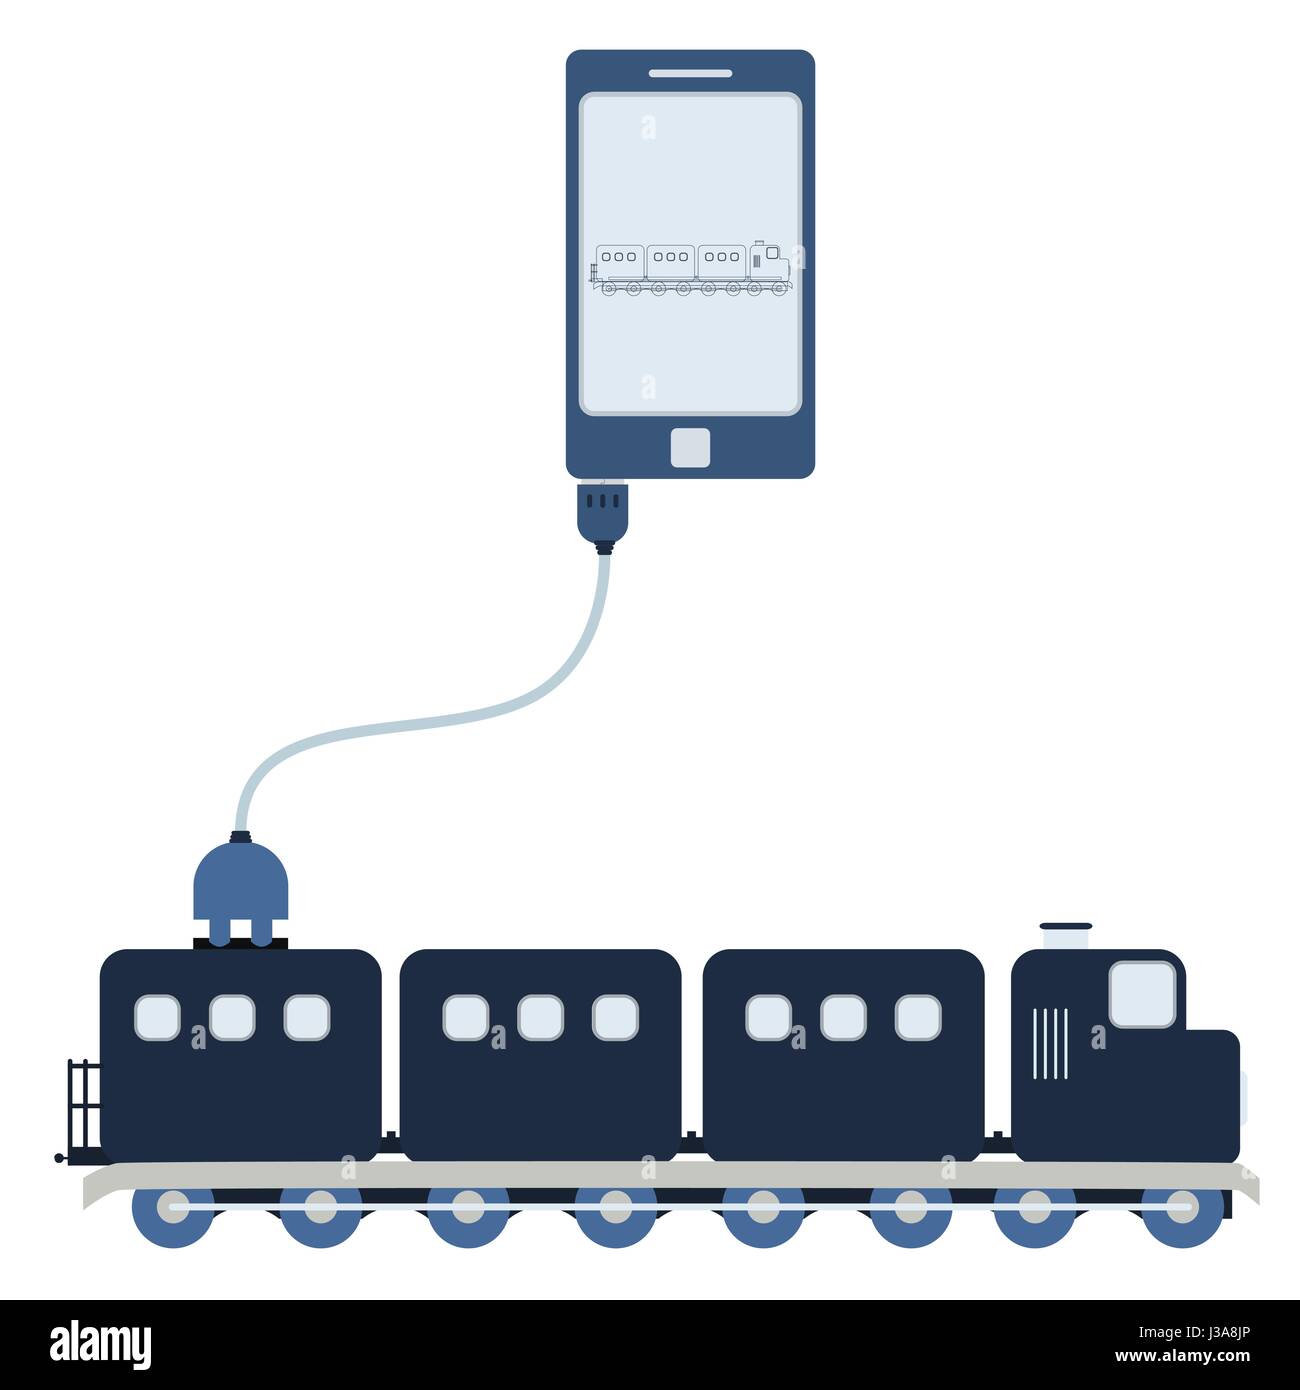 Train connected to a cell phone through a usb cable. Outline of the train being shown on the mobile monitor. Flat design. Isolated. Stock Vector